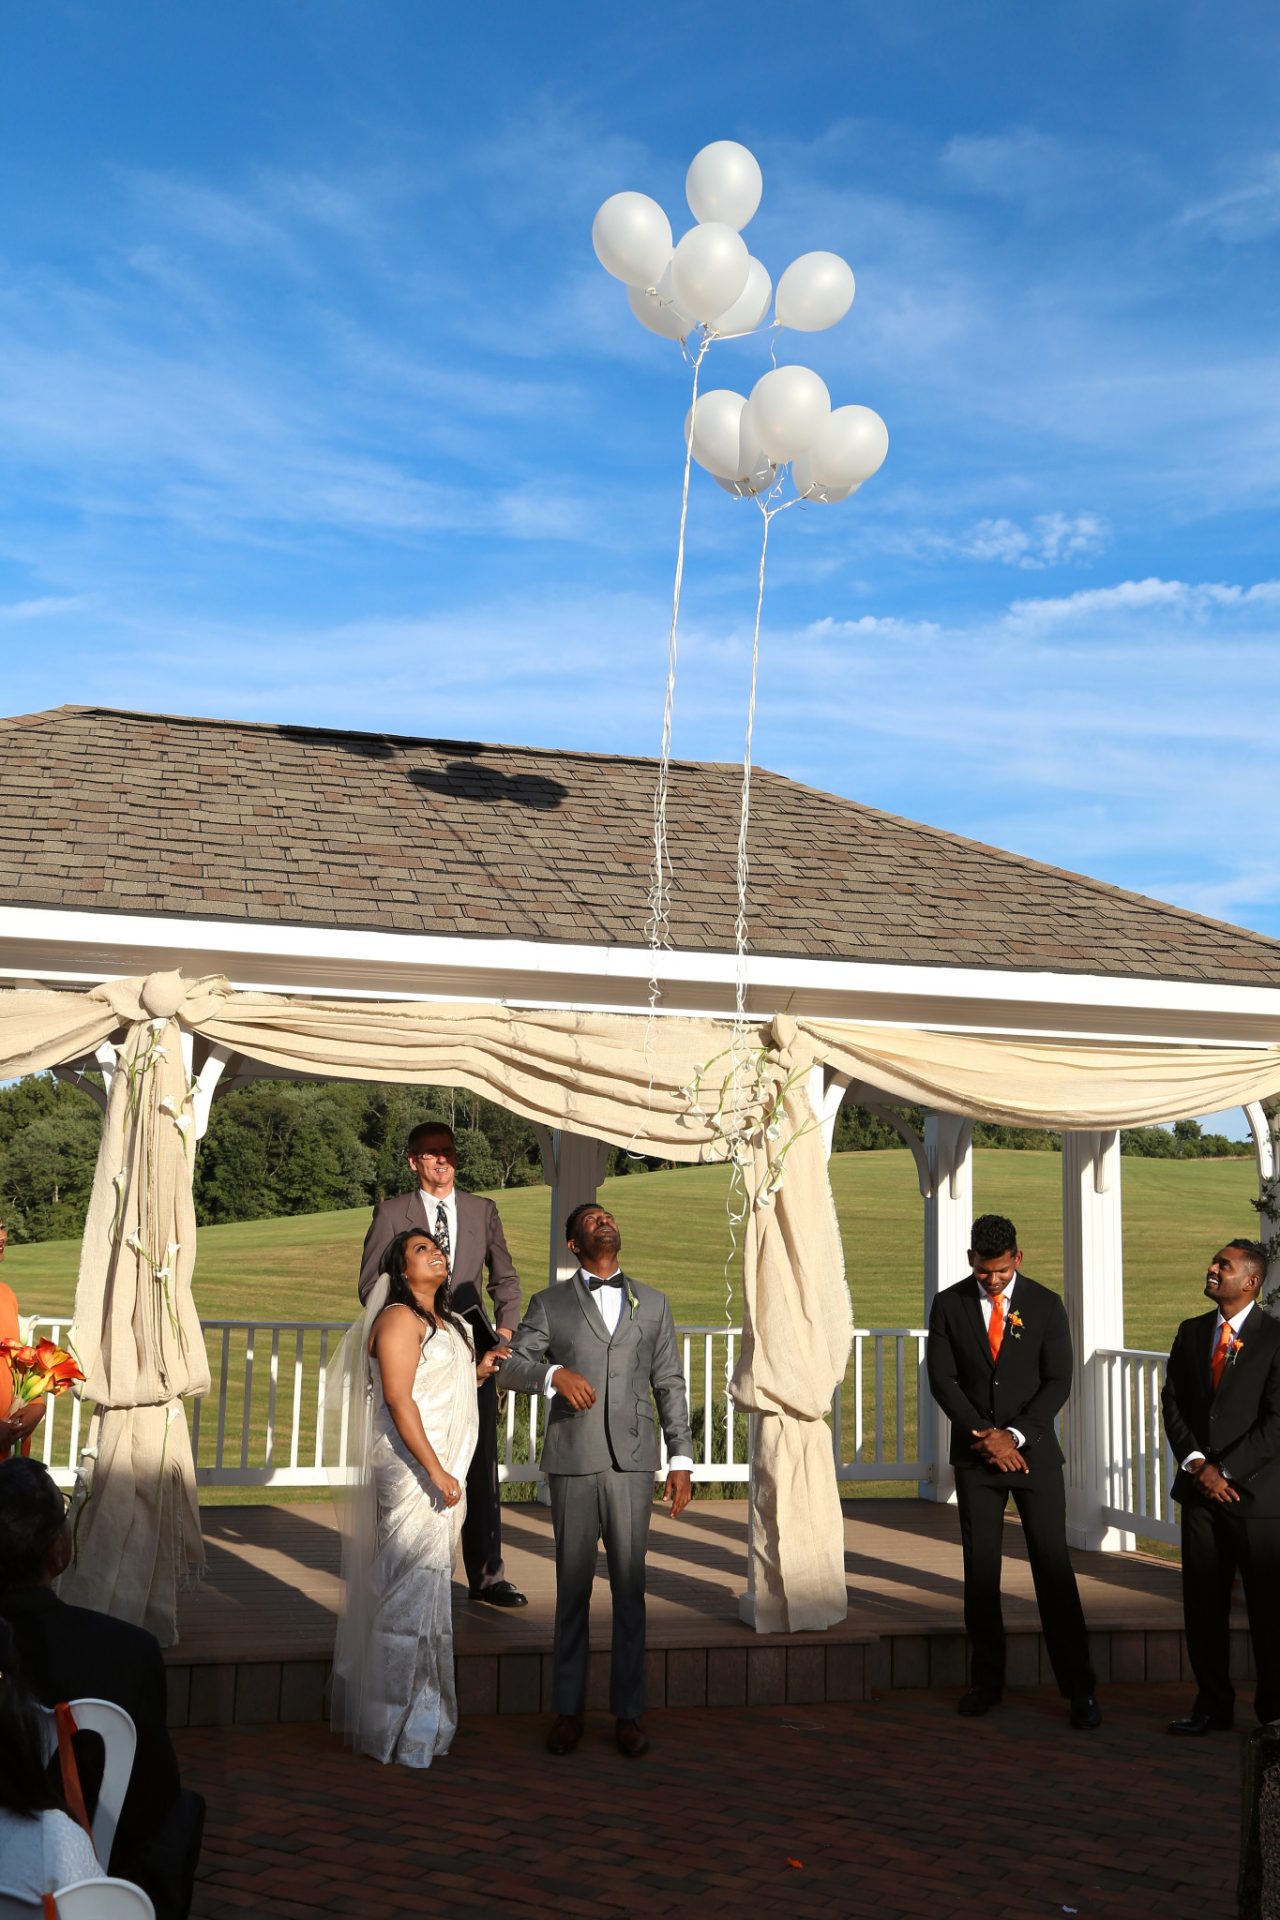 Balloon release after wedding ceremony